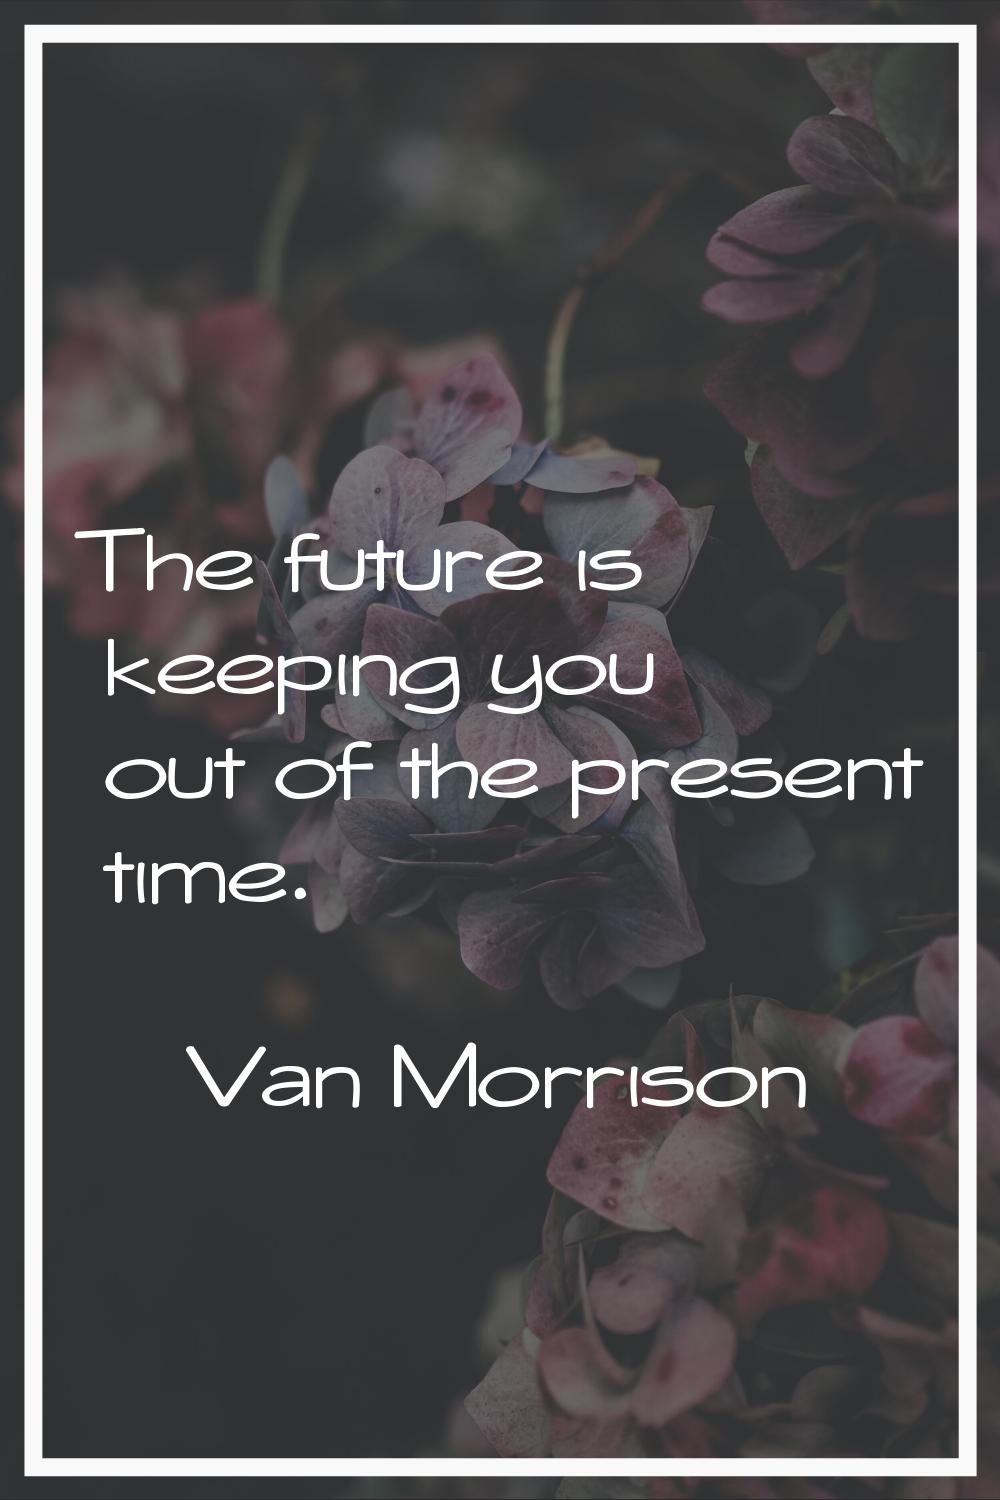 The future is keeping you out of the present time.